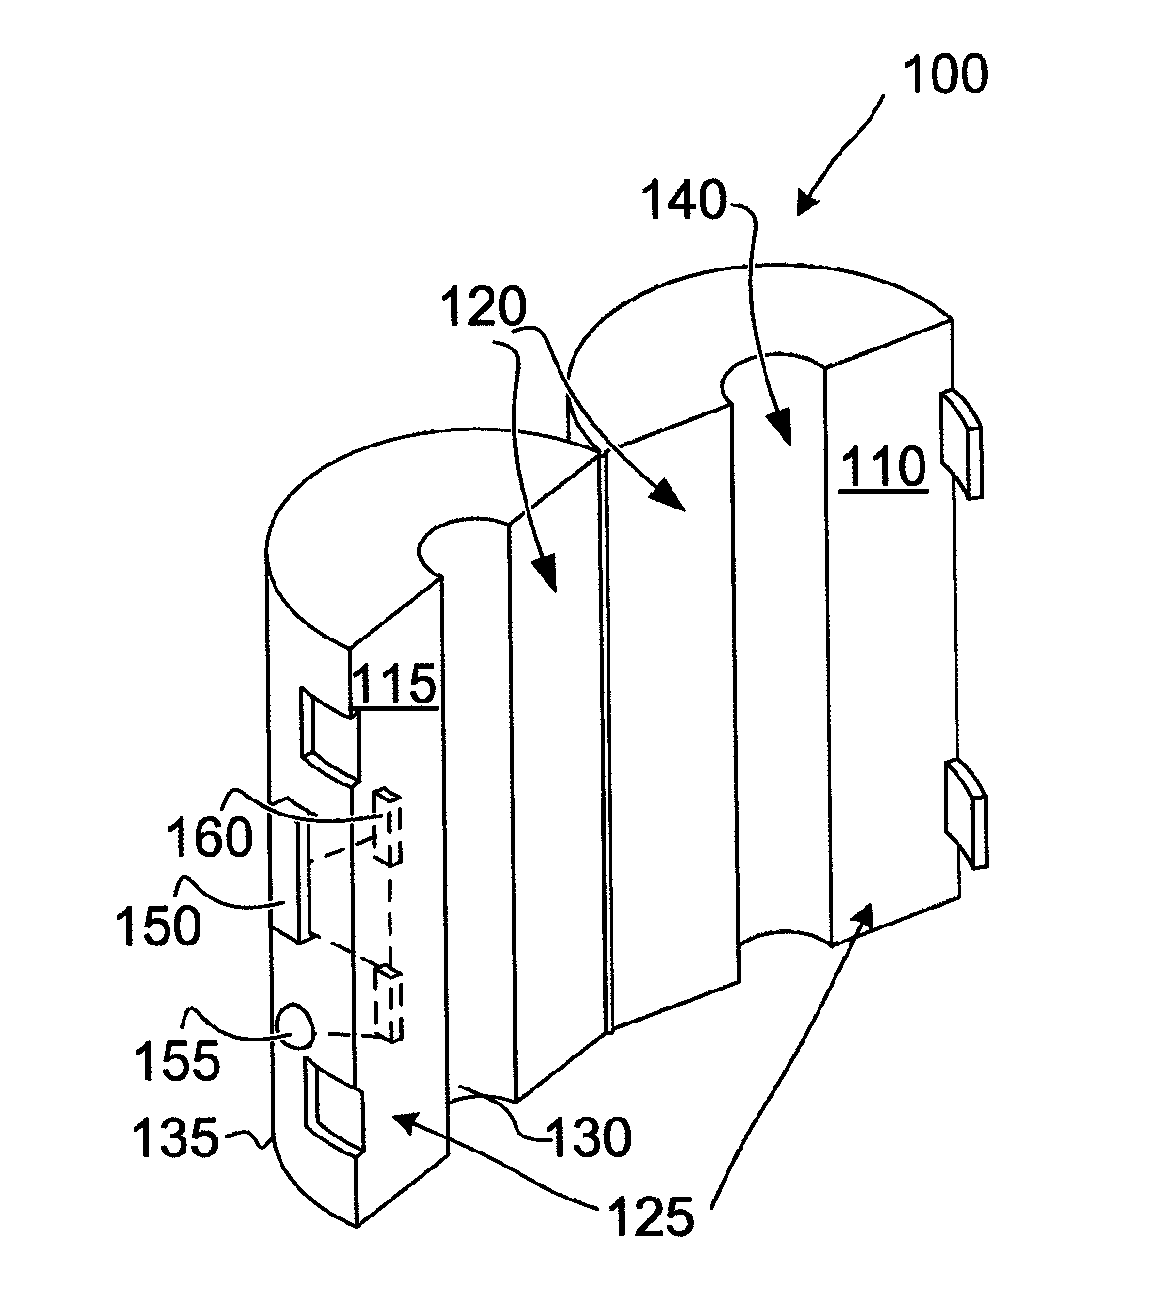 Cable clamp-on device including a user interface